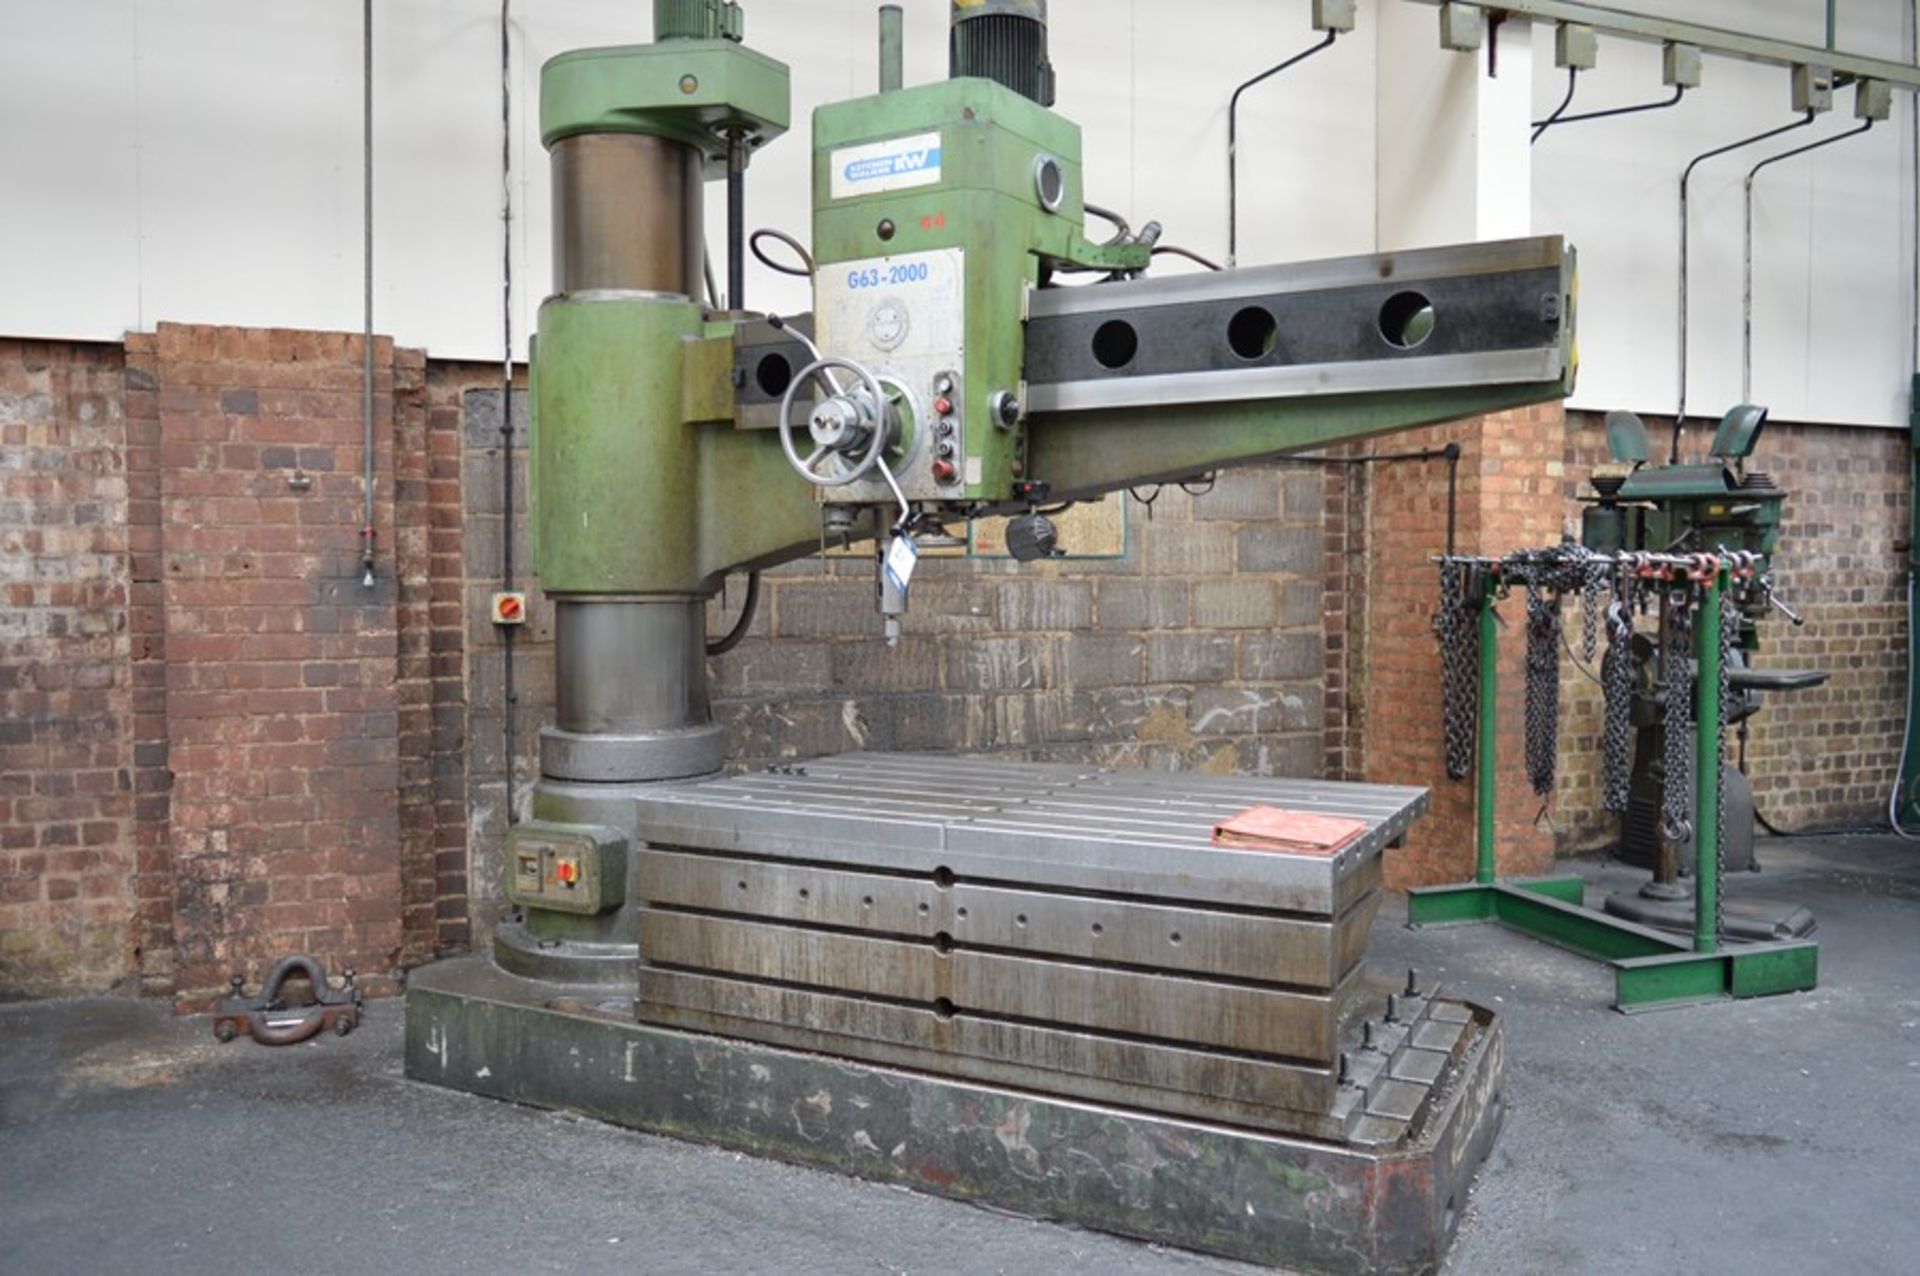 Kitchen & Walker, G63-2000 radial arm drill, Serial No. 508012 (1999) bed size: 1.78m x 1.10m (